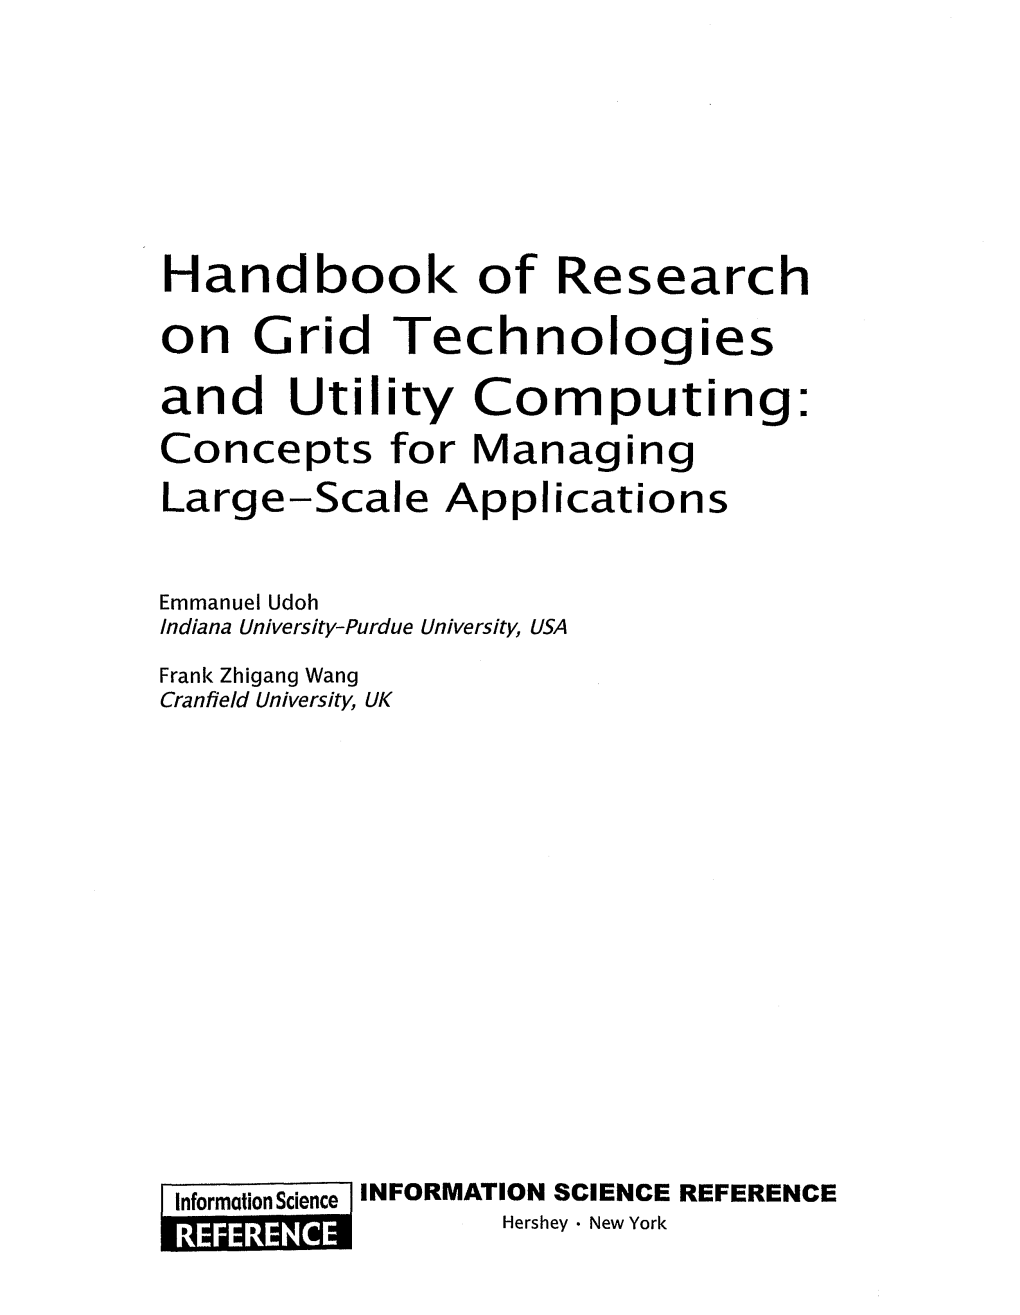 Handbook of Research an Grid Technologies and Utility Computing: Concepts for Managing Large-Scale Applications